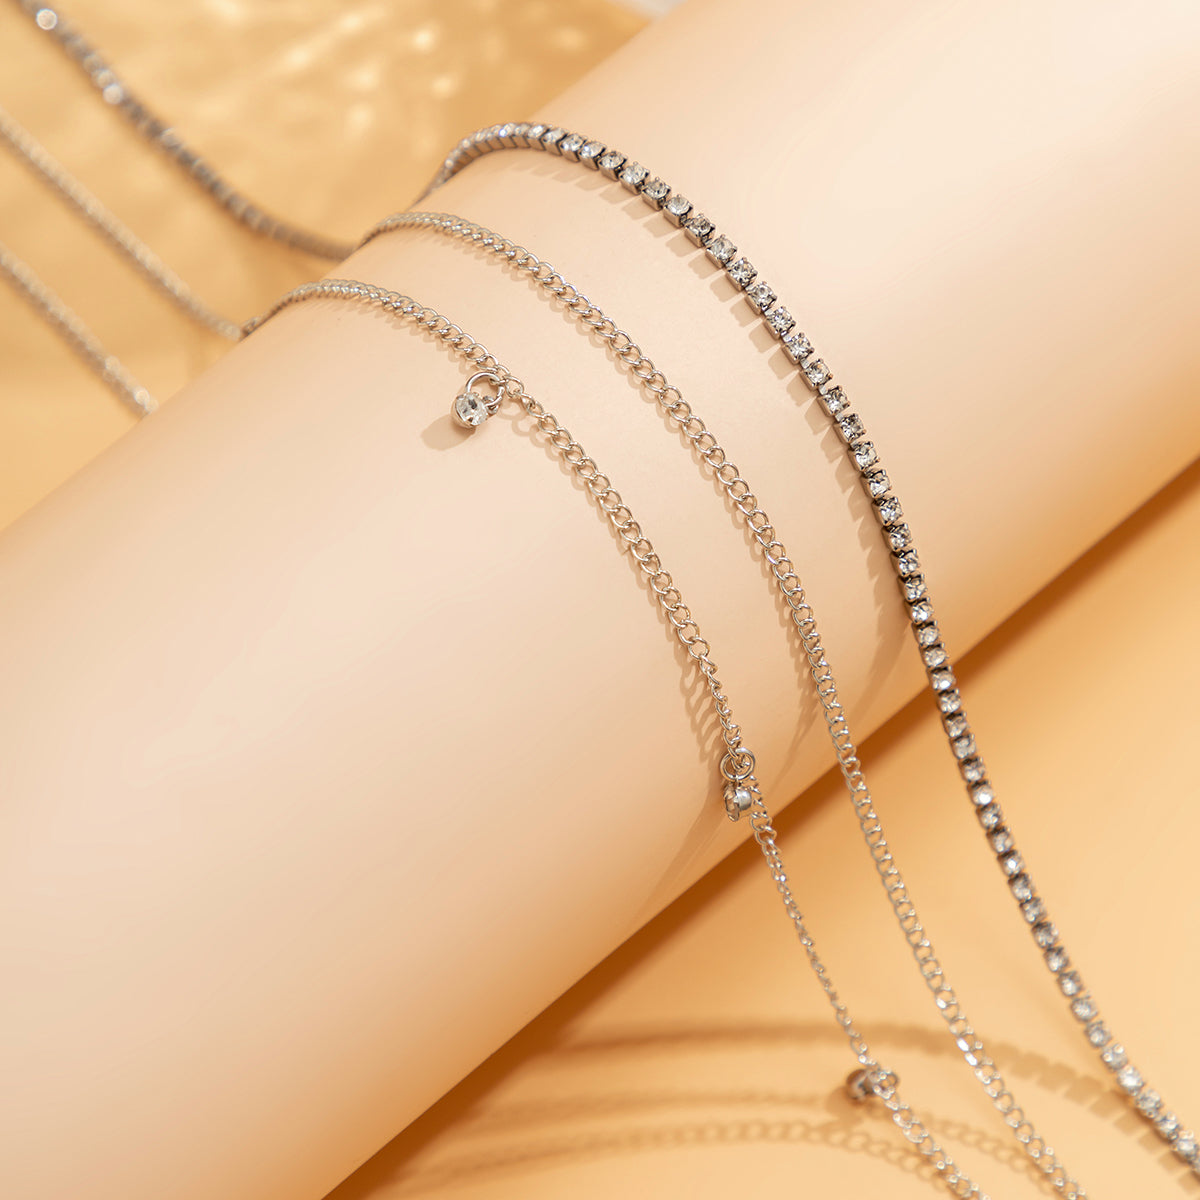 Cubic Zirconia & Silver-Plated Waist Chain Set